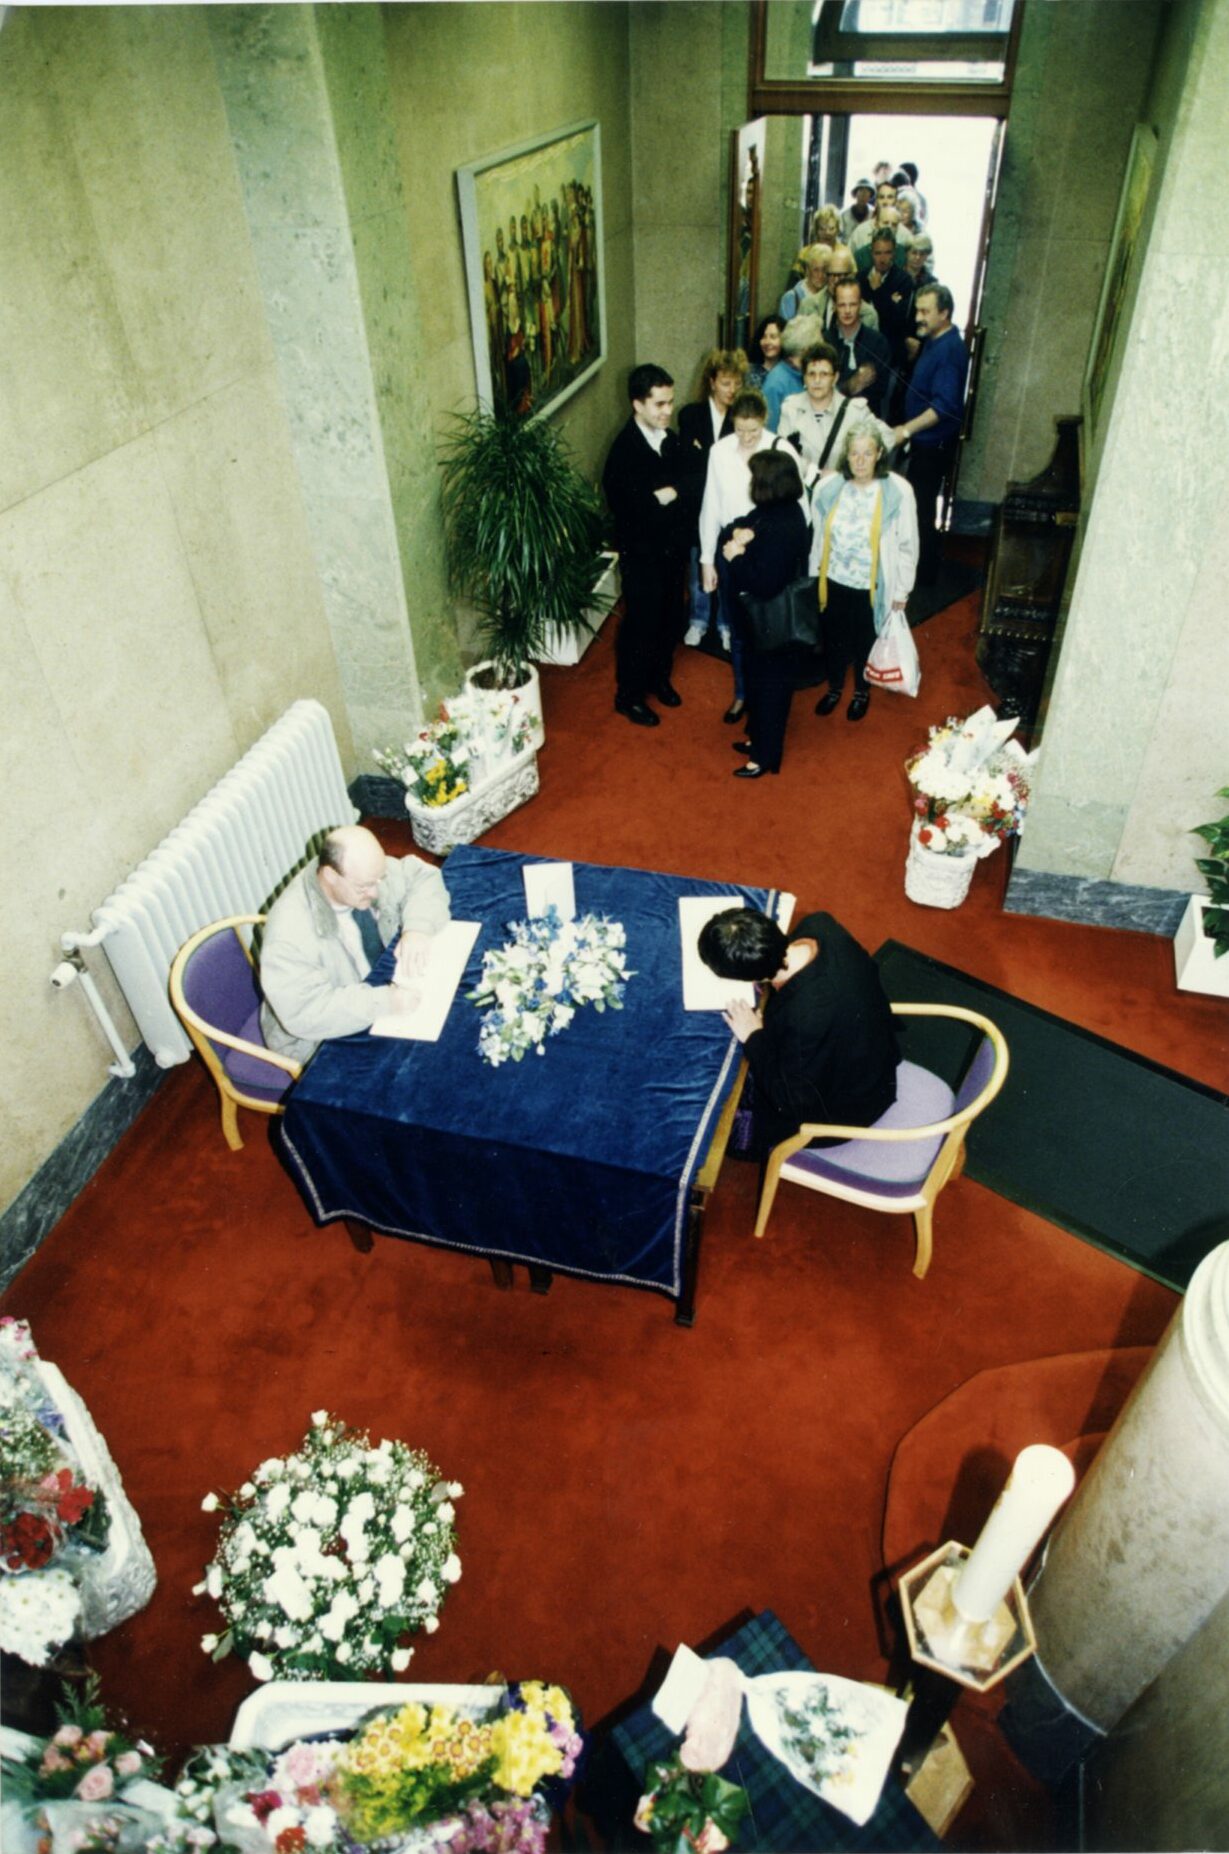 Hundreds of people queued up to sign the condolence book in Dundee after the death of Princess Diana in 1997.